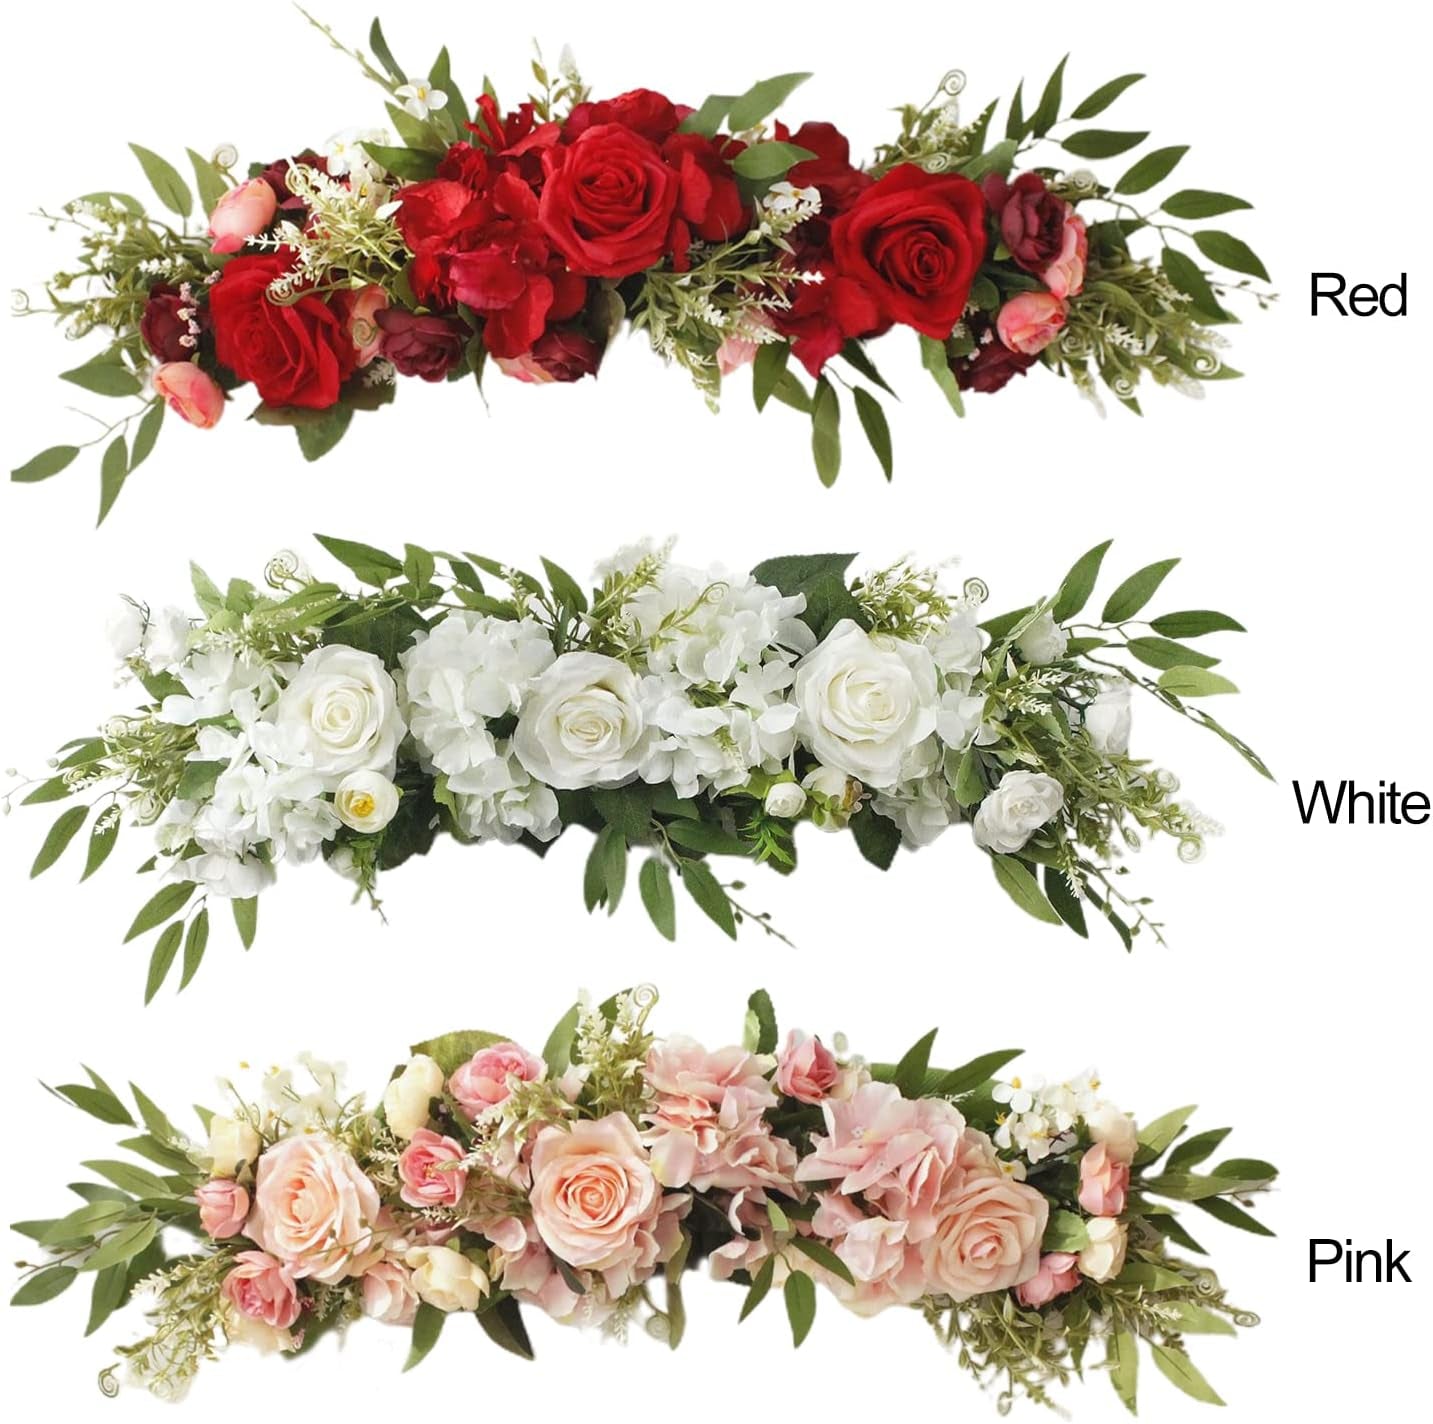 Firlar Artificial Pink Rose Flower Swag, 25.6 Inch Silk Rose Flower Garland Wreath Decorative Swag with Fake Roses and Green Leaves for Wedding Arch Chair Back Front Door Wall Home Decor